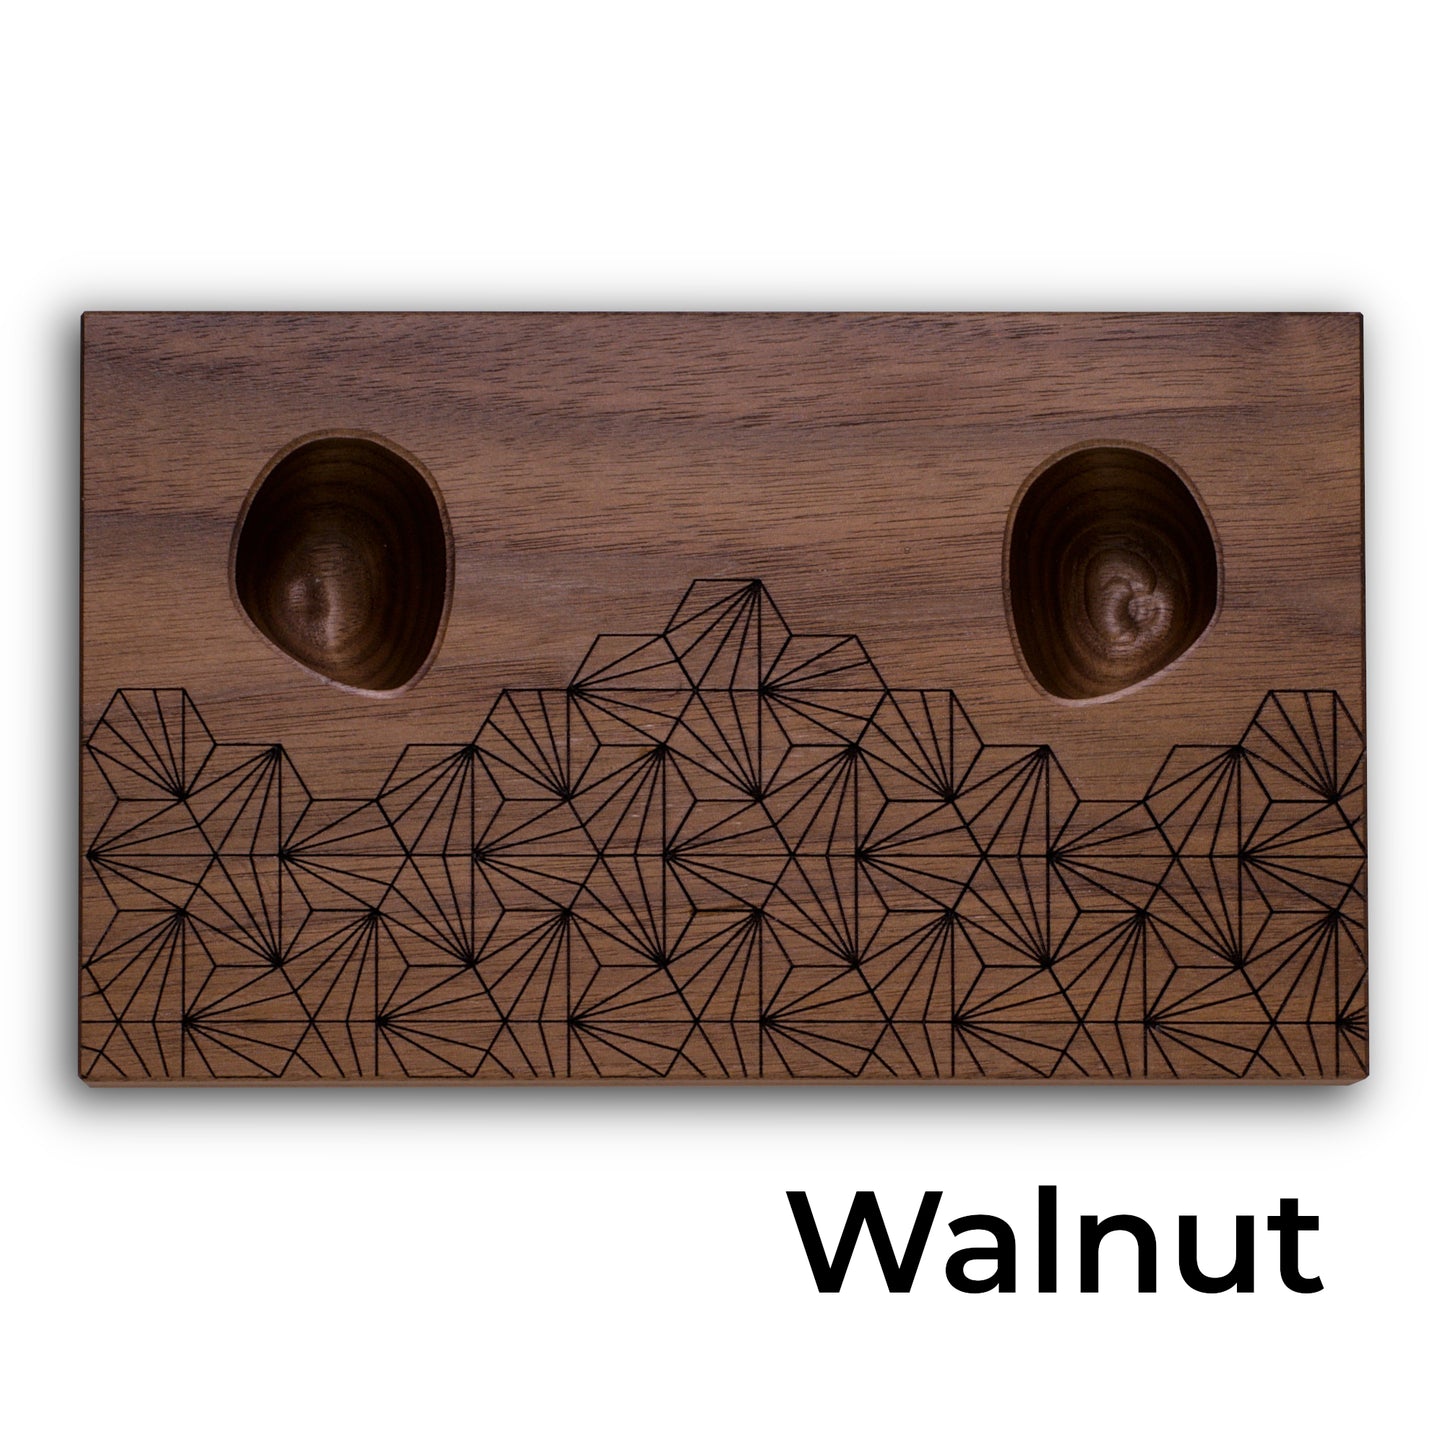 Xbox One Controller Stand in Walnut with geometric design